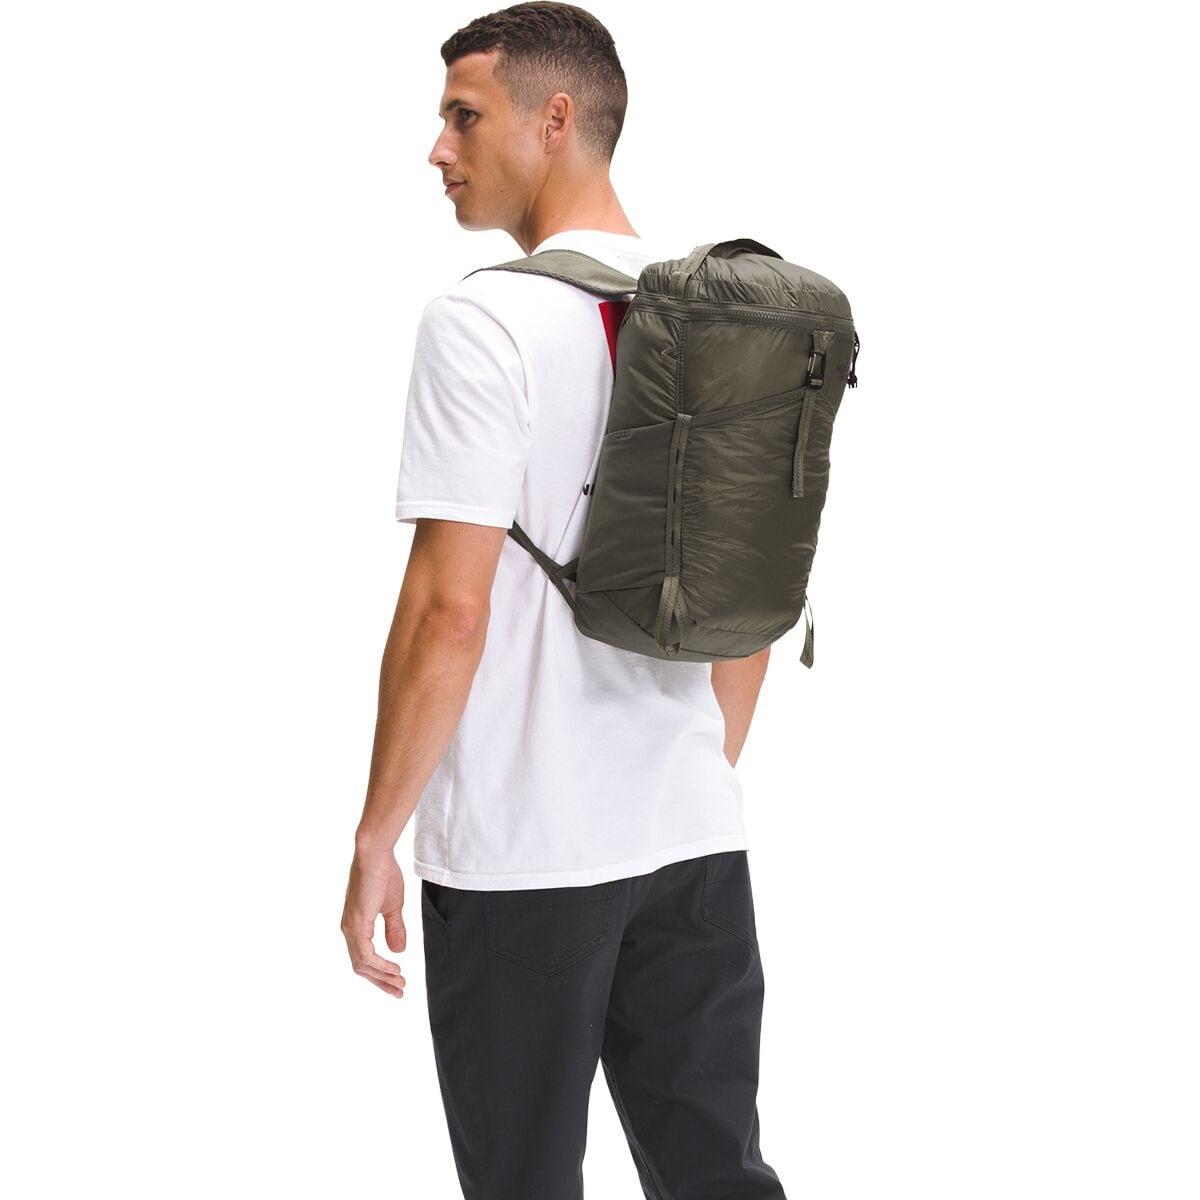 Mm Ru ik ontbijt The North Face Flyweight 18L Daypack - Accessories